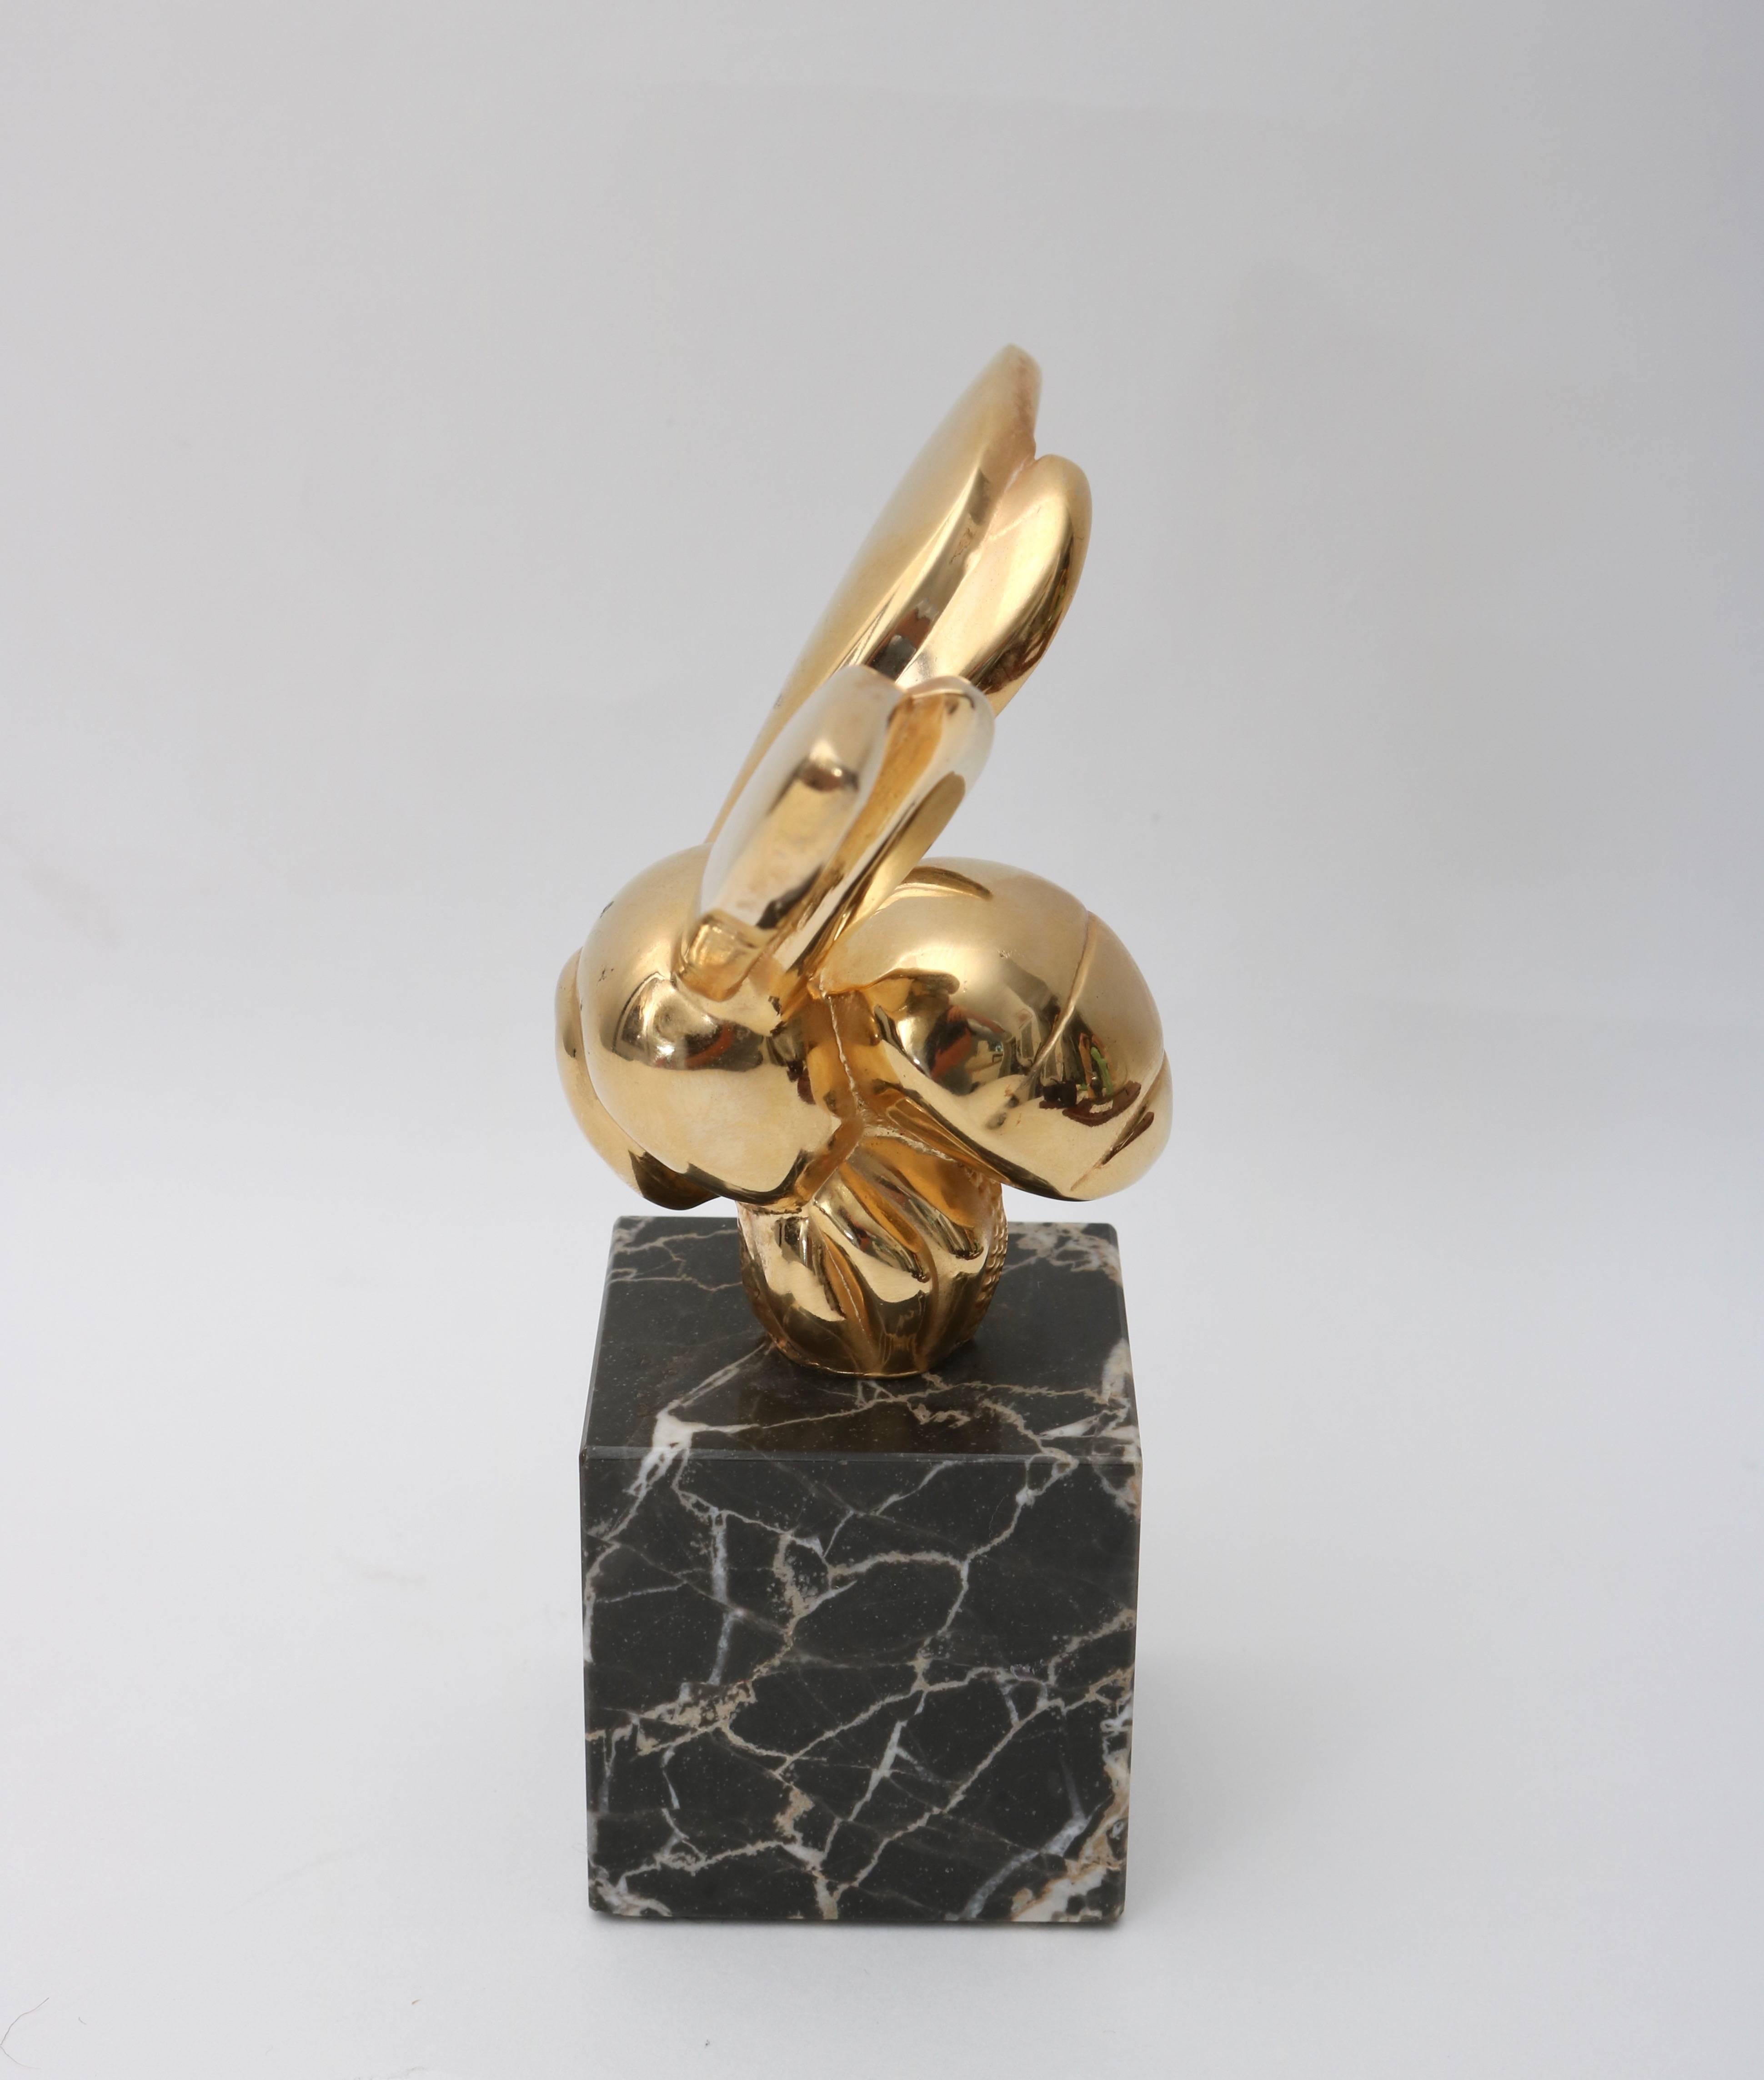 This stylish sculpture is an authorized museum replica by Alva Studios and was produced in the late 1970s. The original by G. Lachaise is in the Philadelphia Museum of Art.

For best net trade price or additional questions regarding this item,